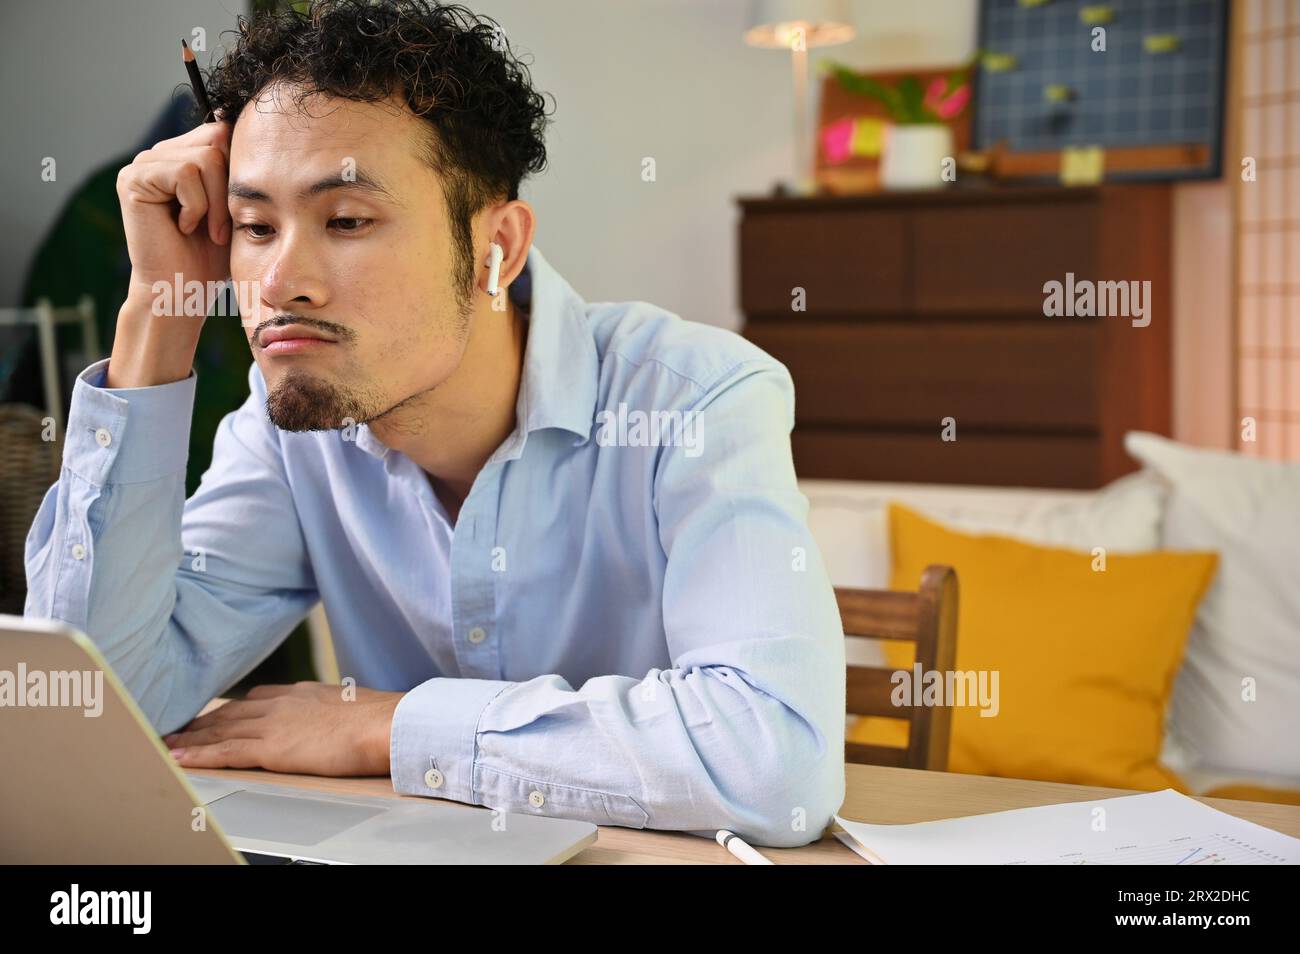 businessman working at home freelance Stock Photo